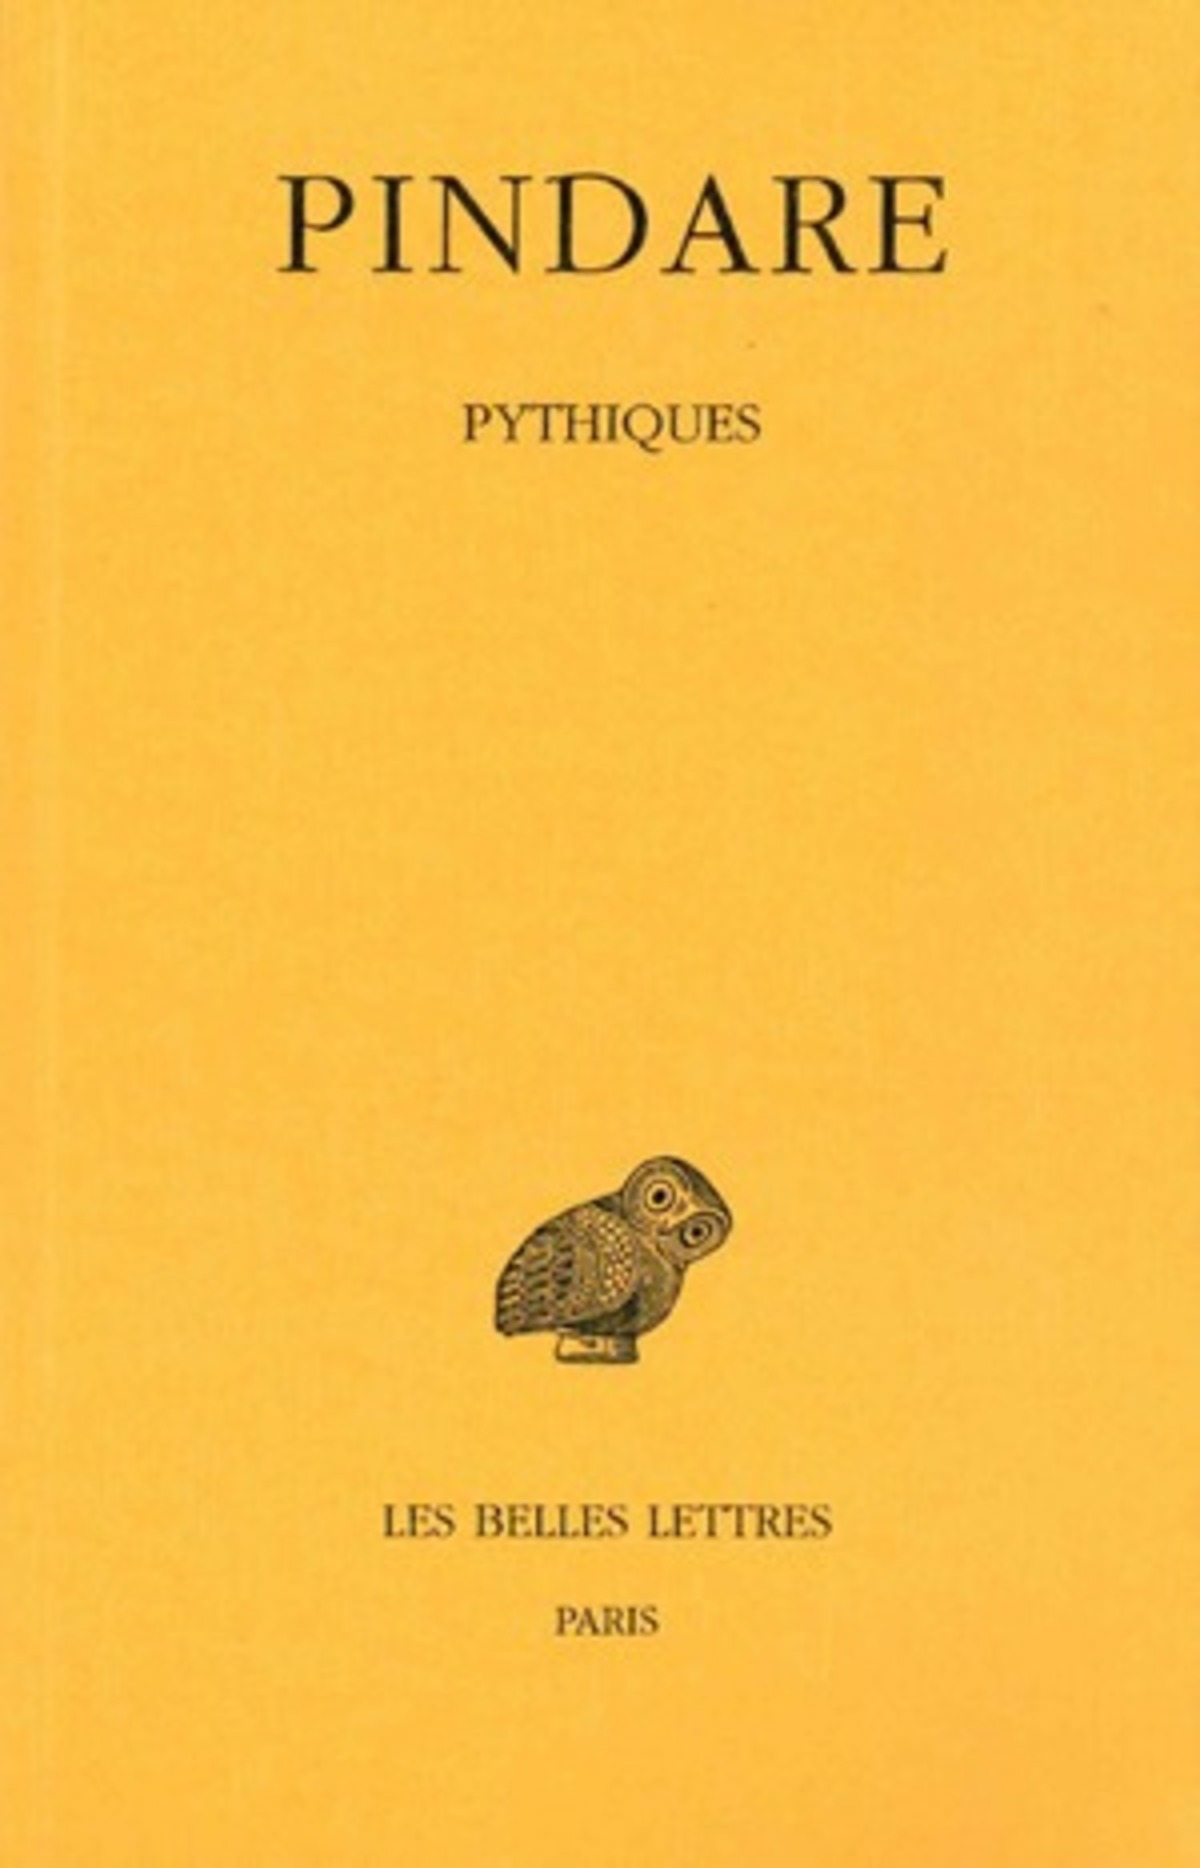 Tome II : Pythiques